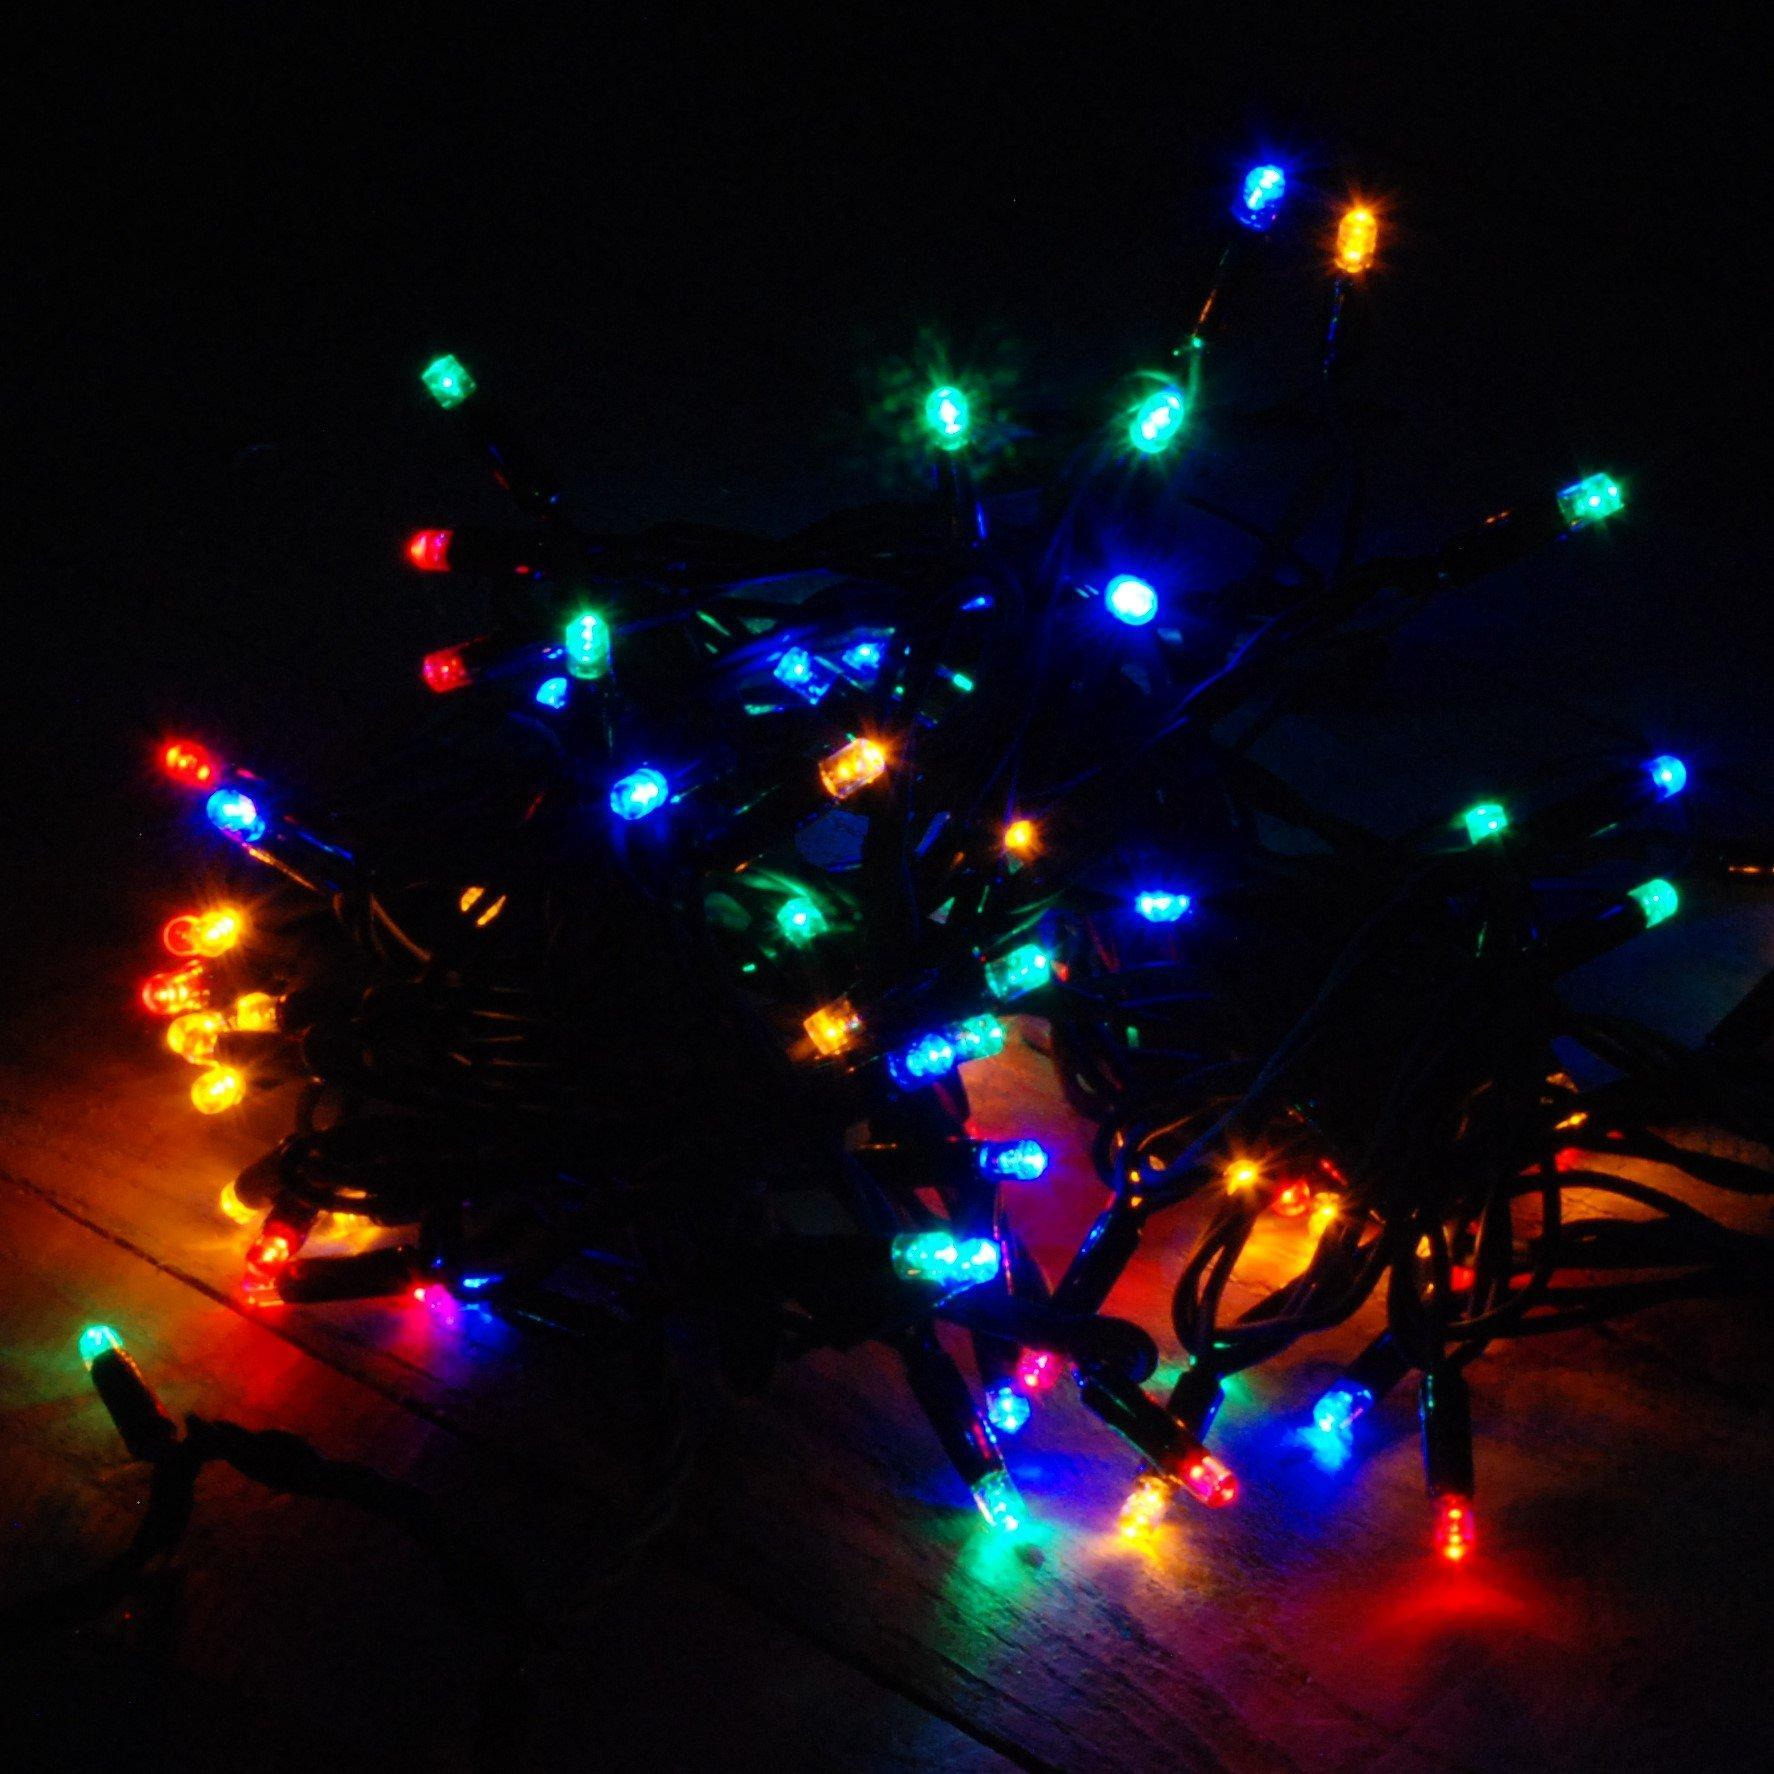 9.9m (100 LED) Snowtime Multi-Coloured Connectable Lights with 3m Lead Wire - image 1